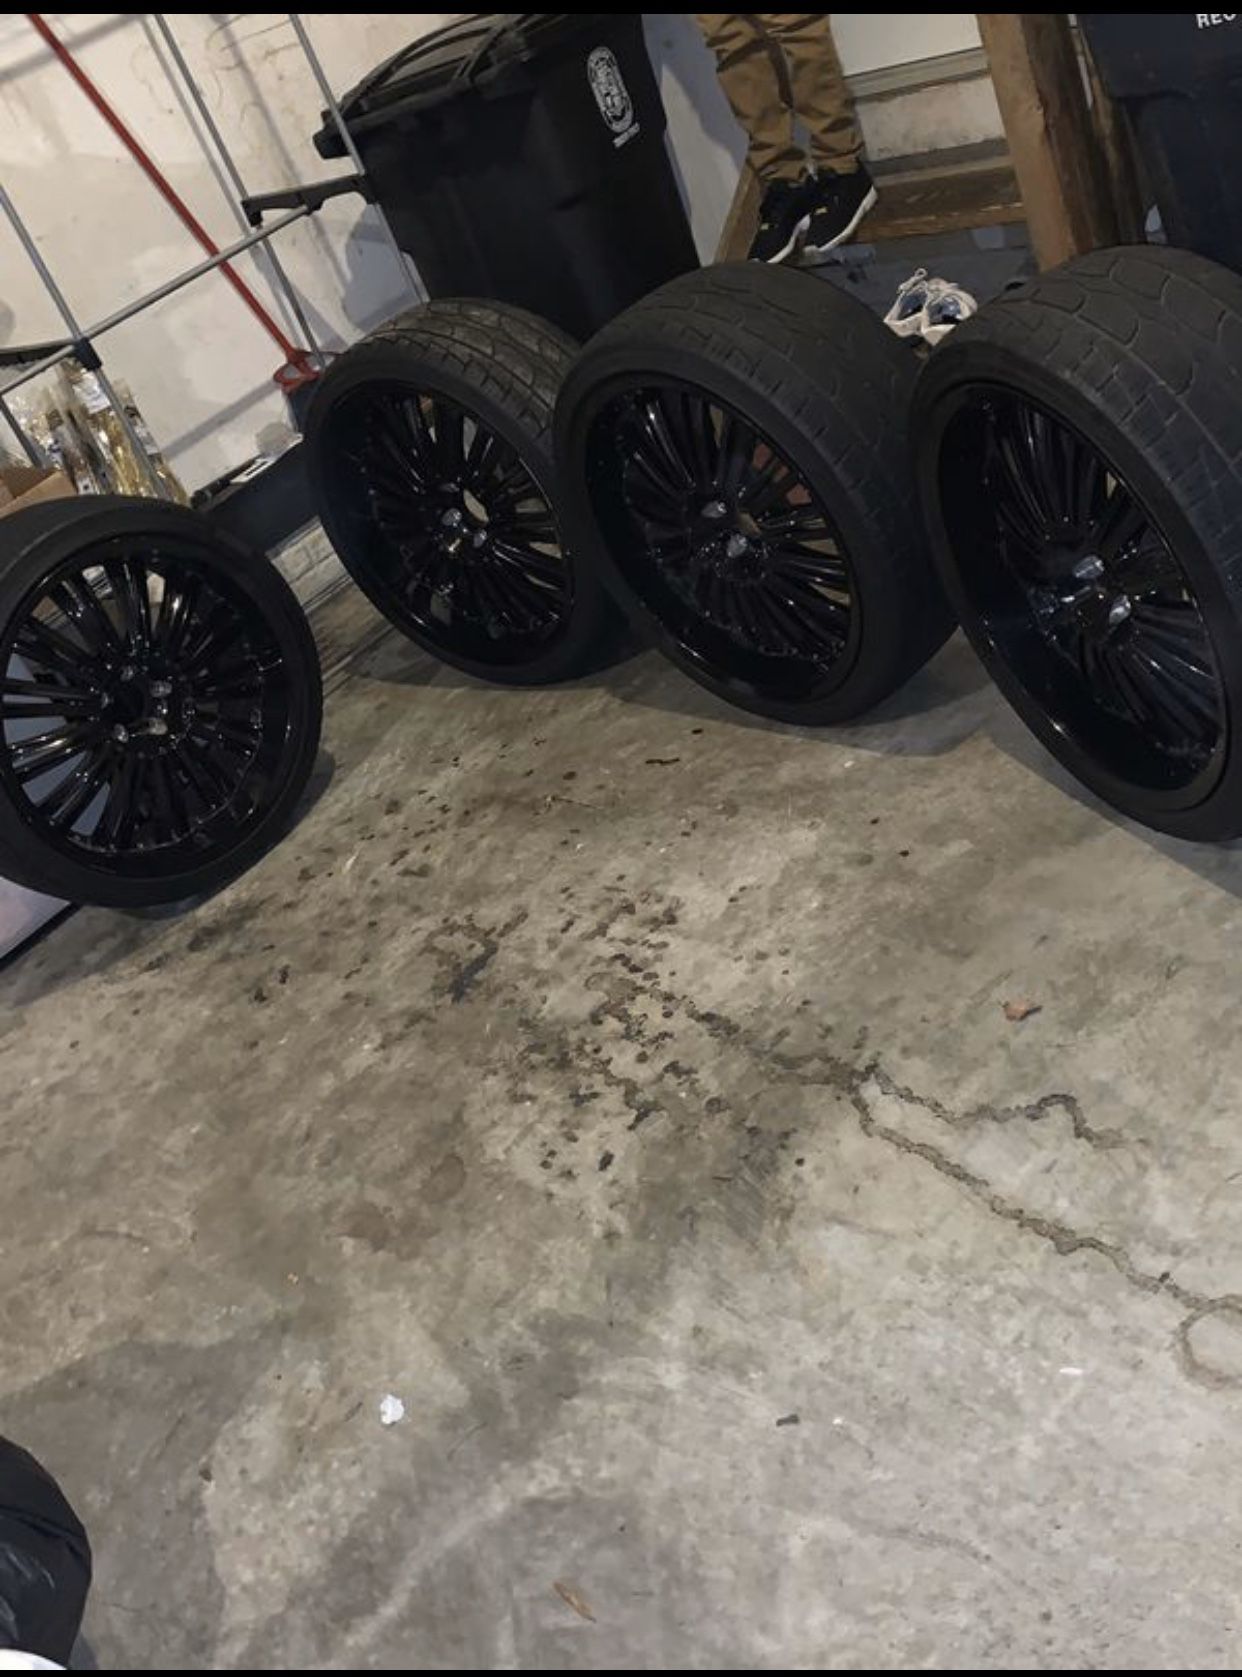 22s for sale need to be gone ASAP